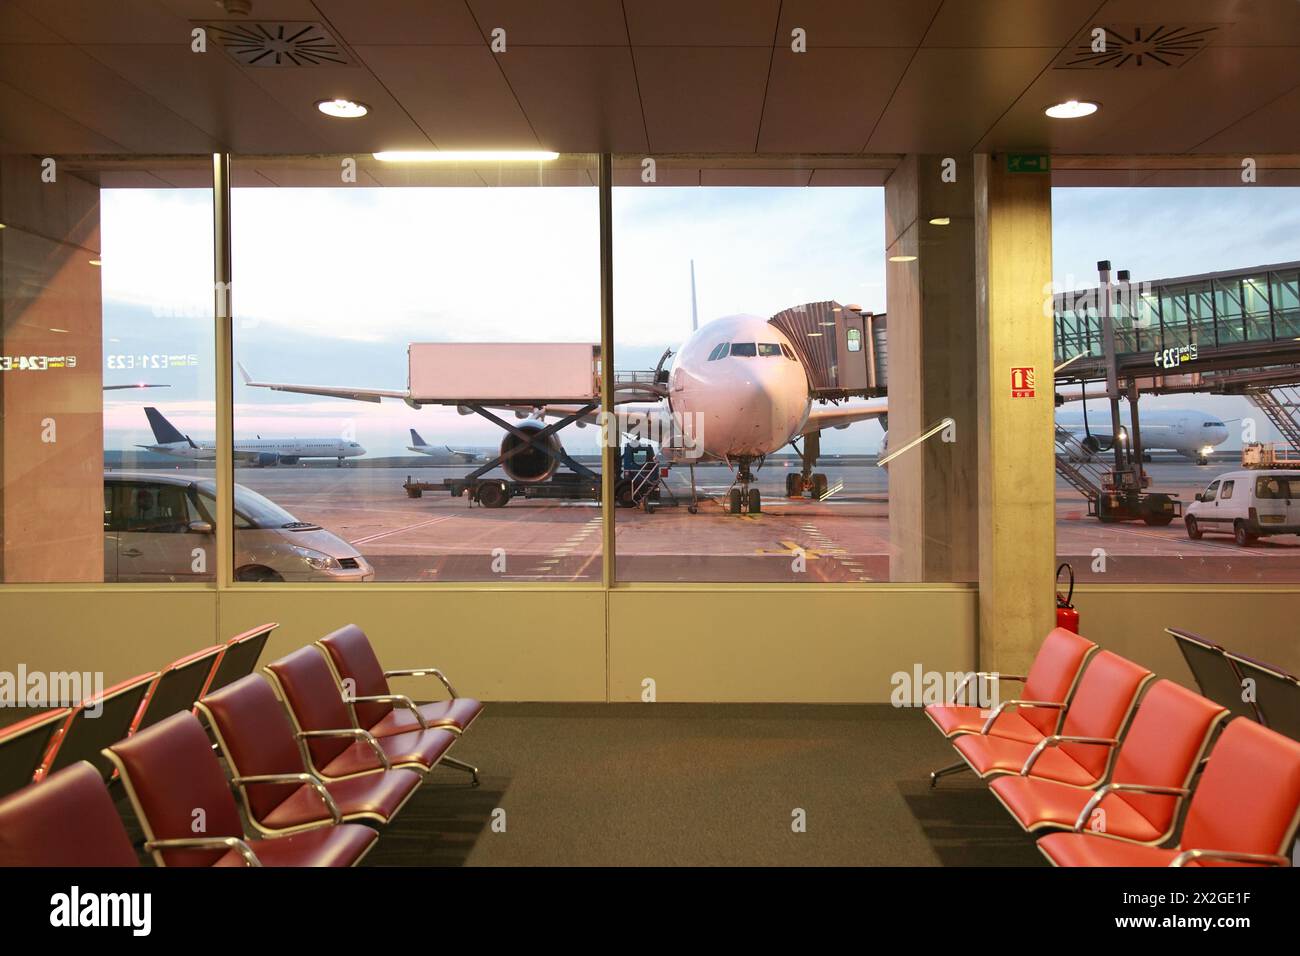 Empty waiting room with red armchairs at Airport, windows, airplanes Stock Photo